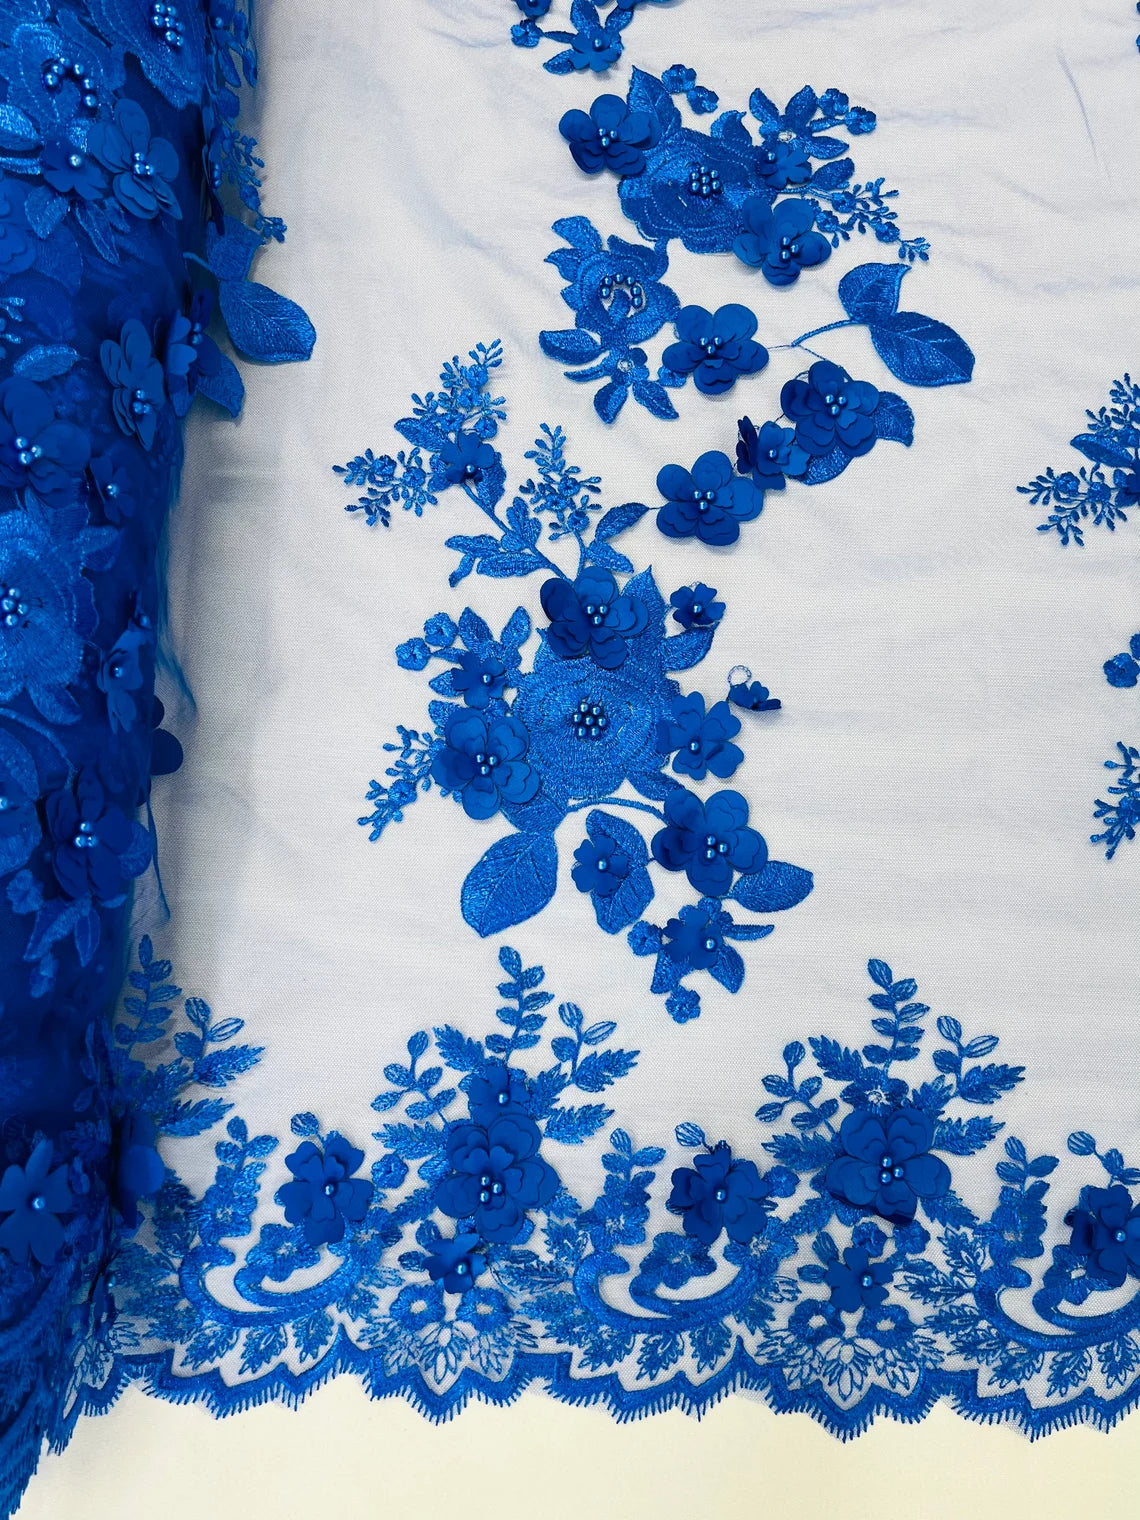 3D Flower Panels Fabric - Royal Blue - Flower Panels Bead Embroidered on Lace Fabric Sold By Yard